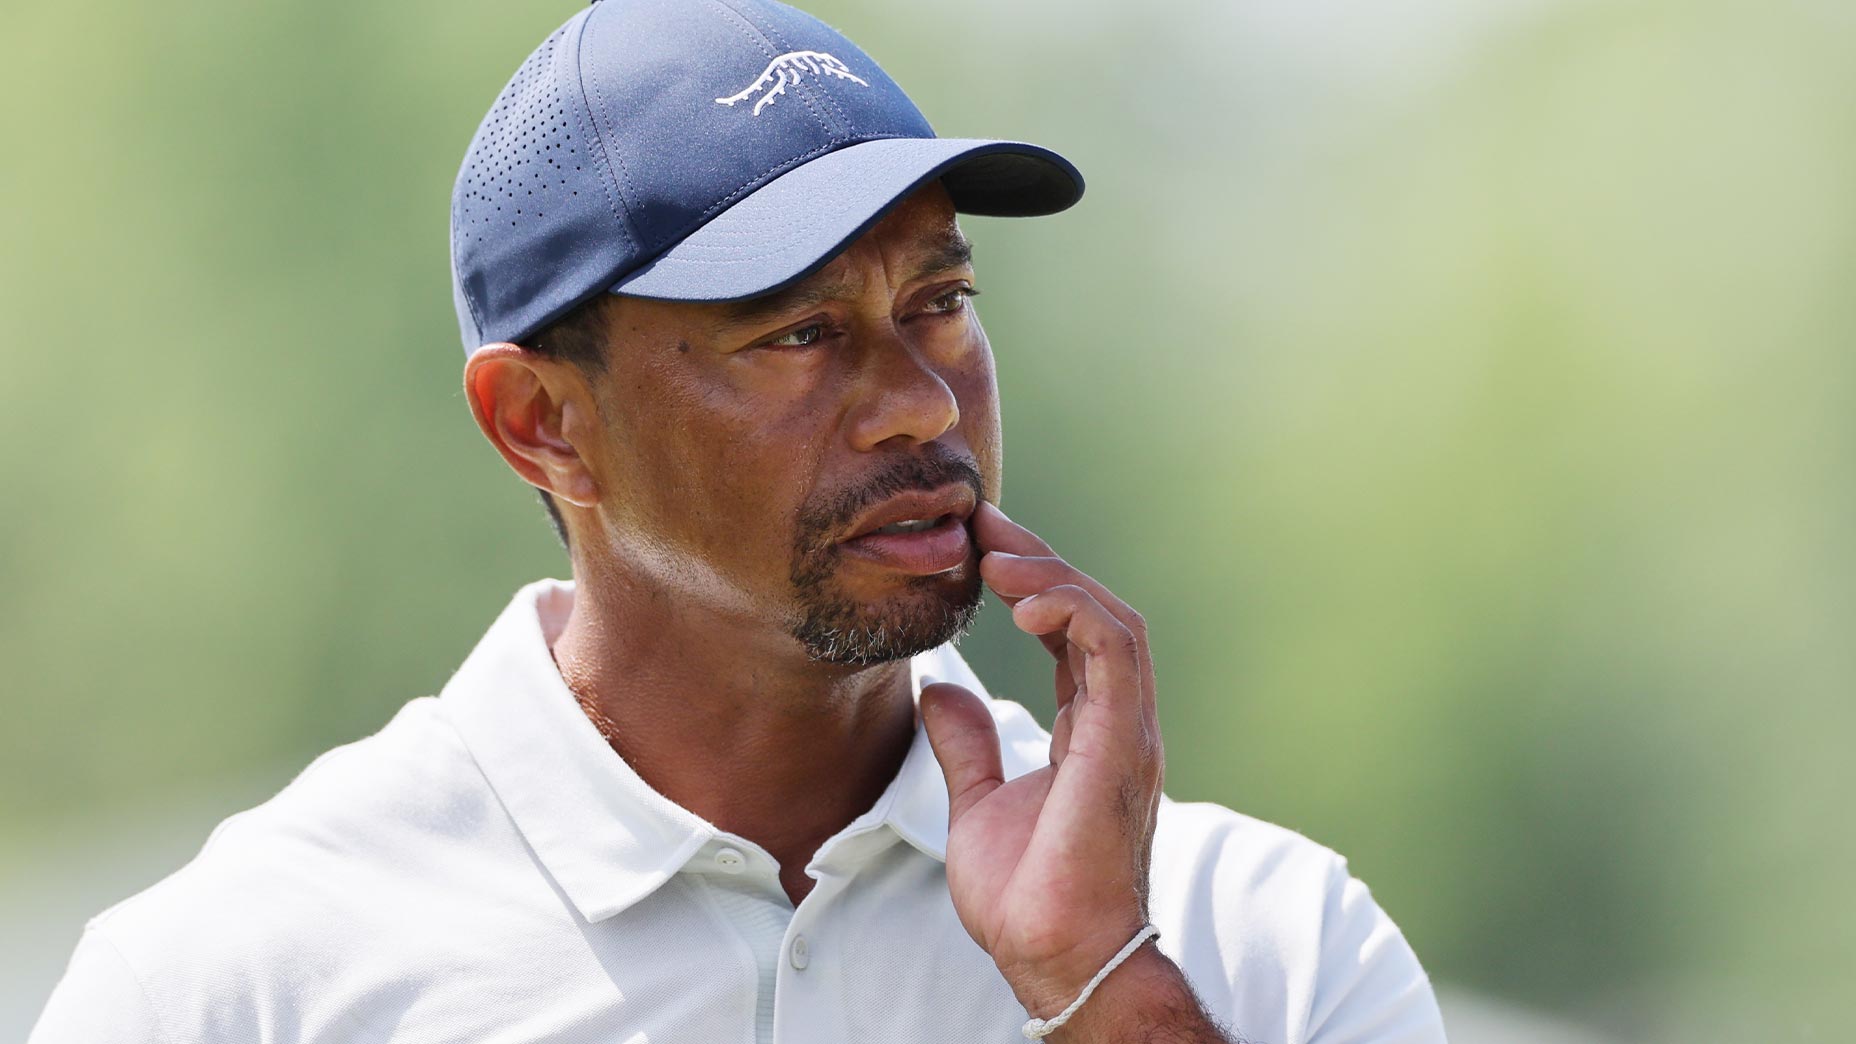 tiger woods scratches face in blue hat at the PGA championship